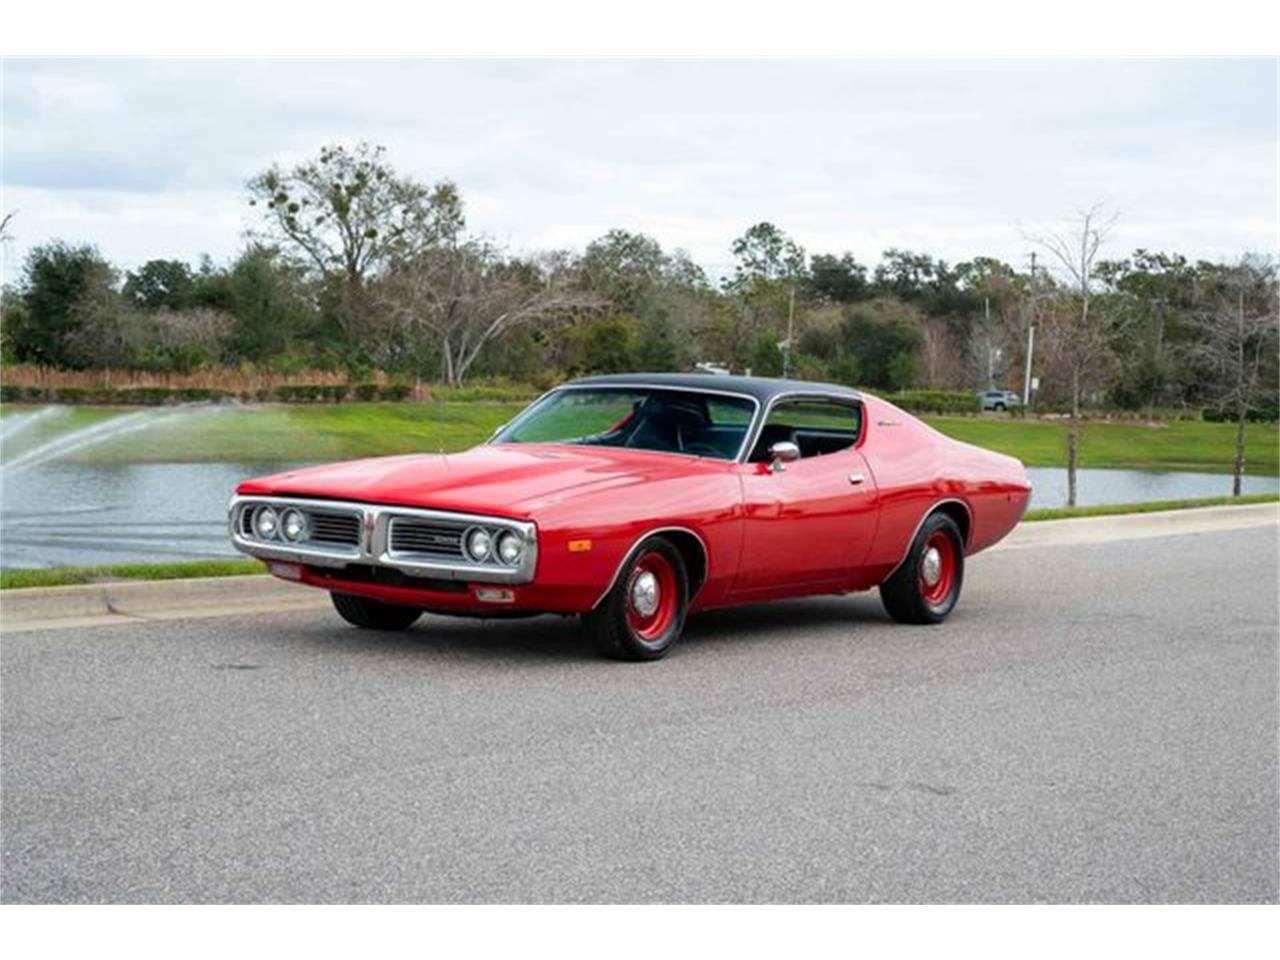 For Sale: 1972 Dodge Charger in Calverton, New York for sale in Calverton, NY